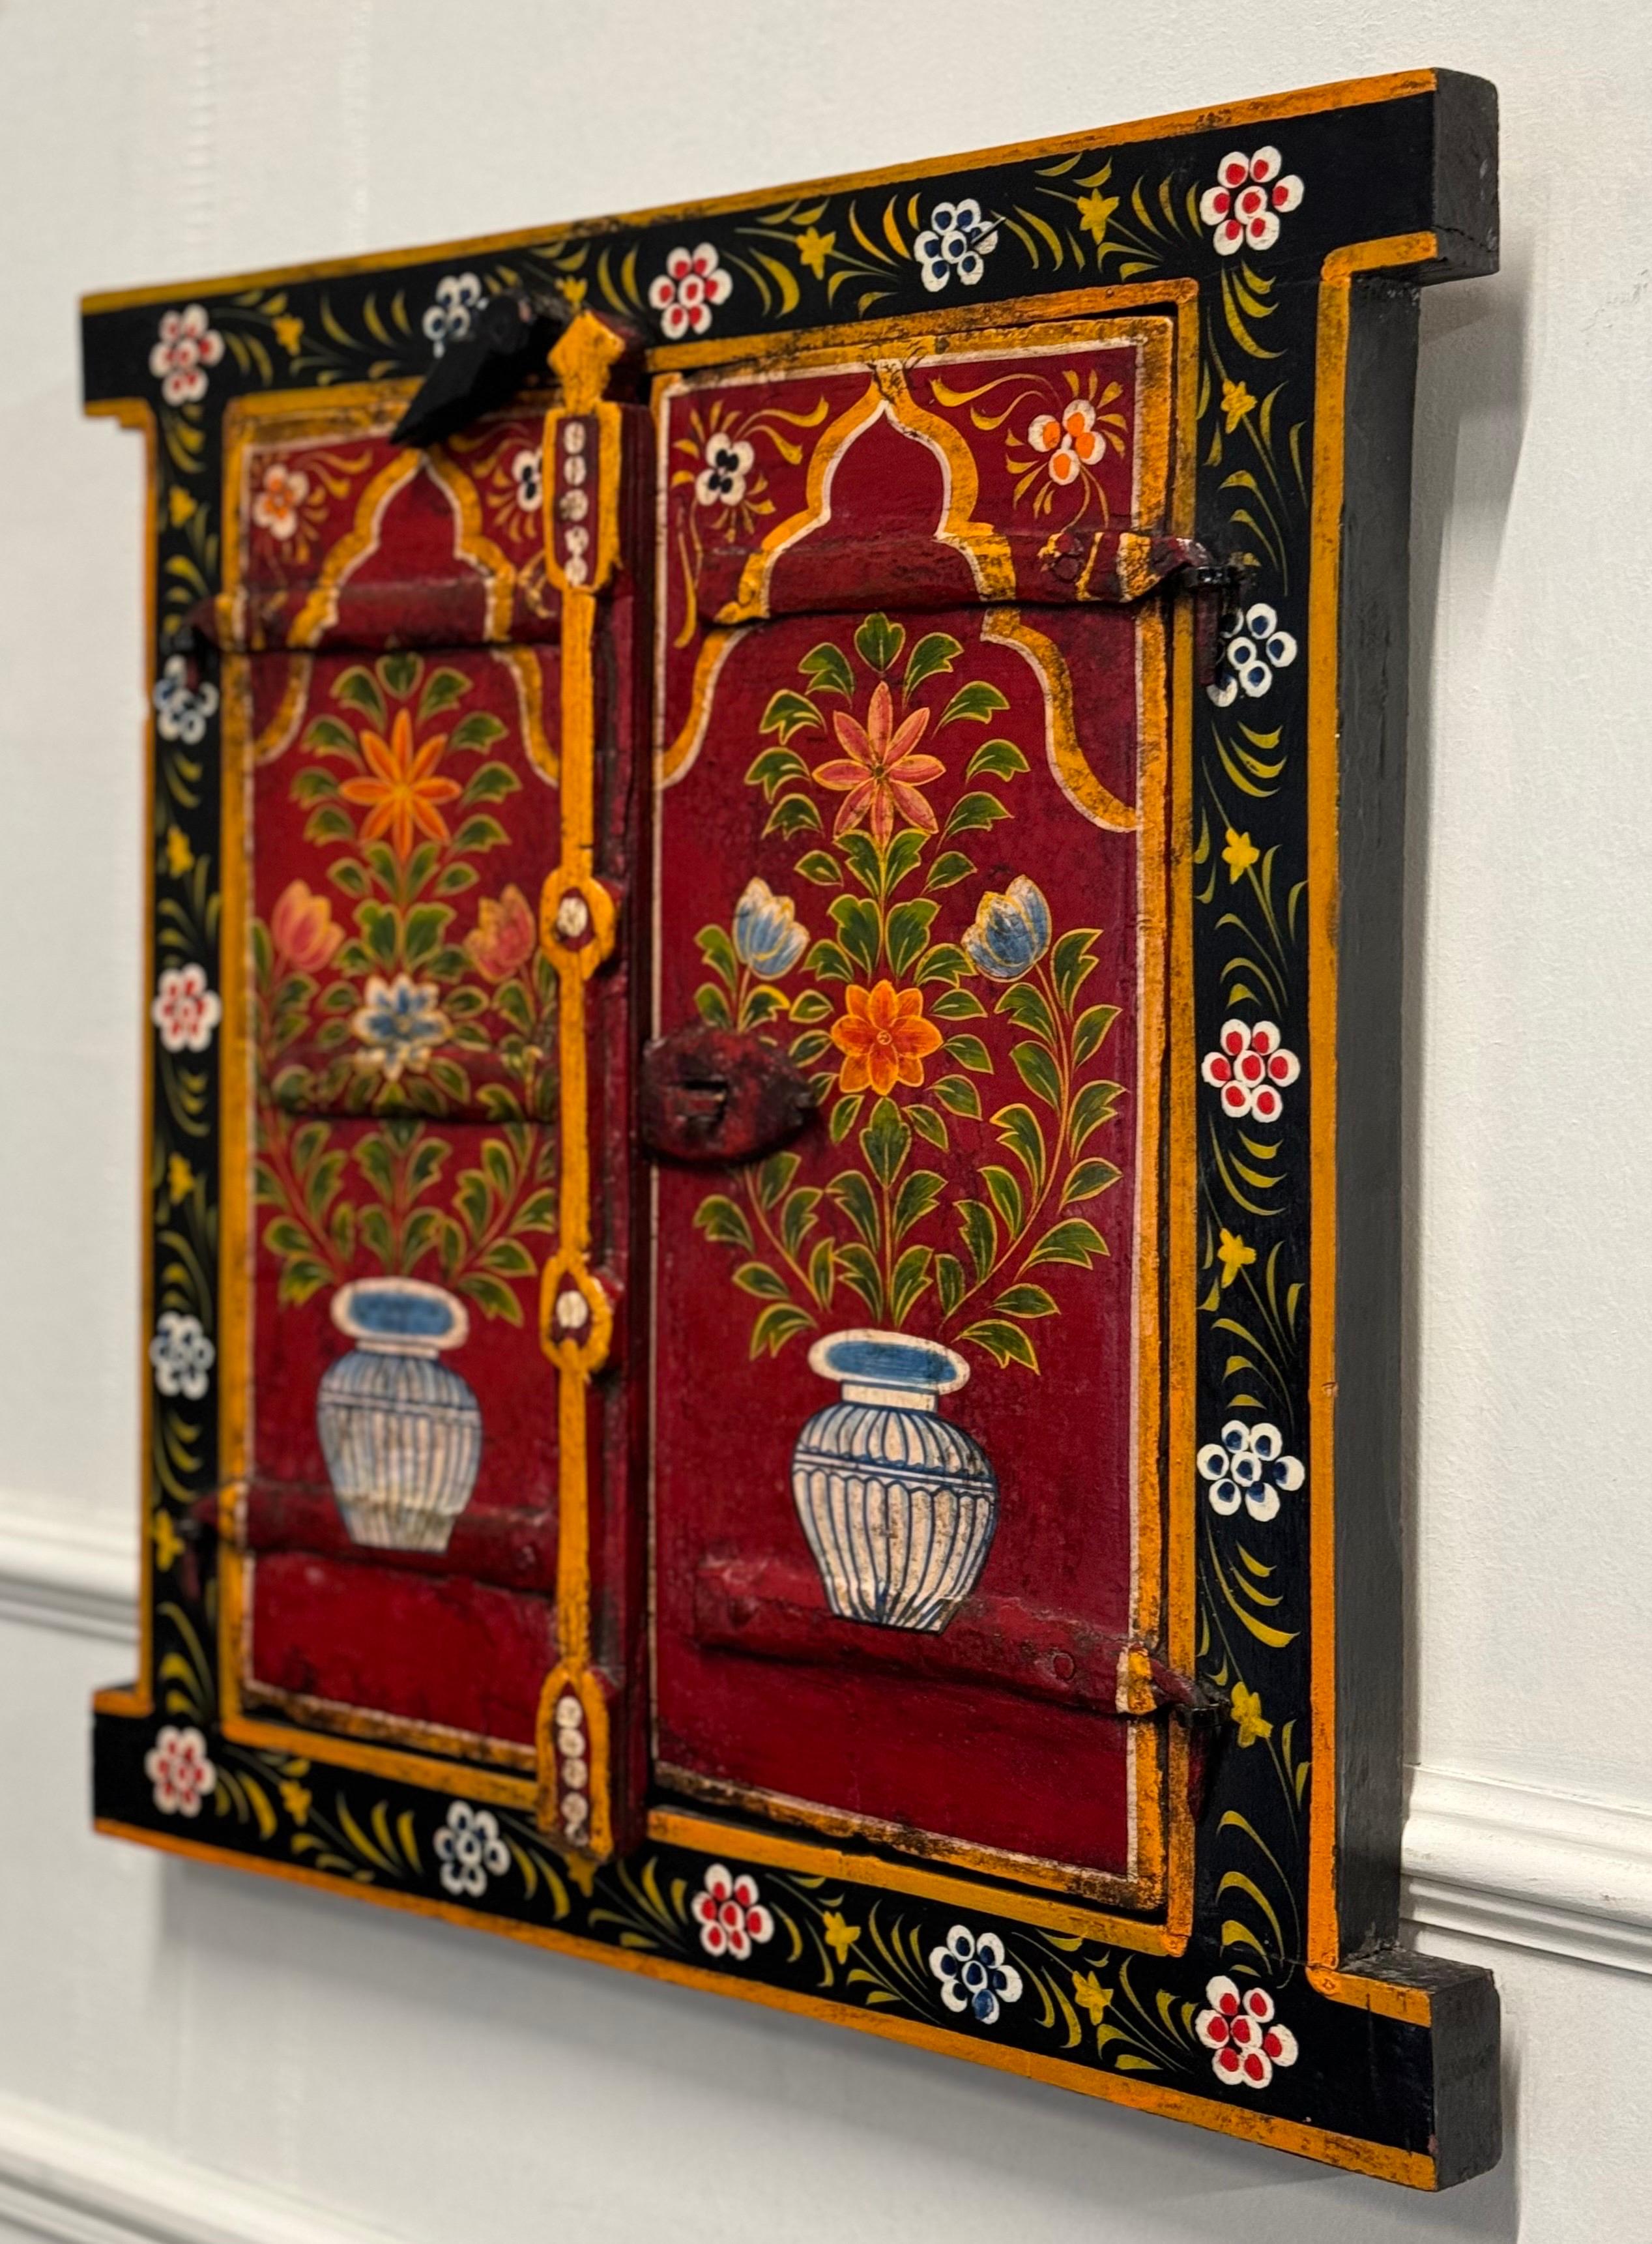 

We are delighted to offer for sale this Lovely Old Indian Hand Painted Wood Window Decoration

An old Indian-painted wood window frame depicting a flower and vase design showcases intricate hand-painted details and vibrant colours.

This type of